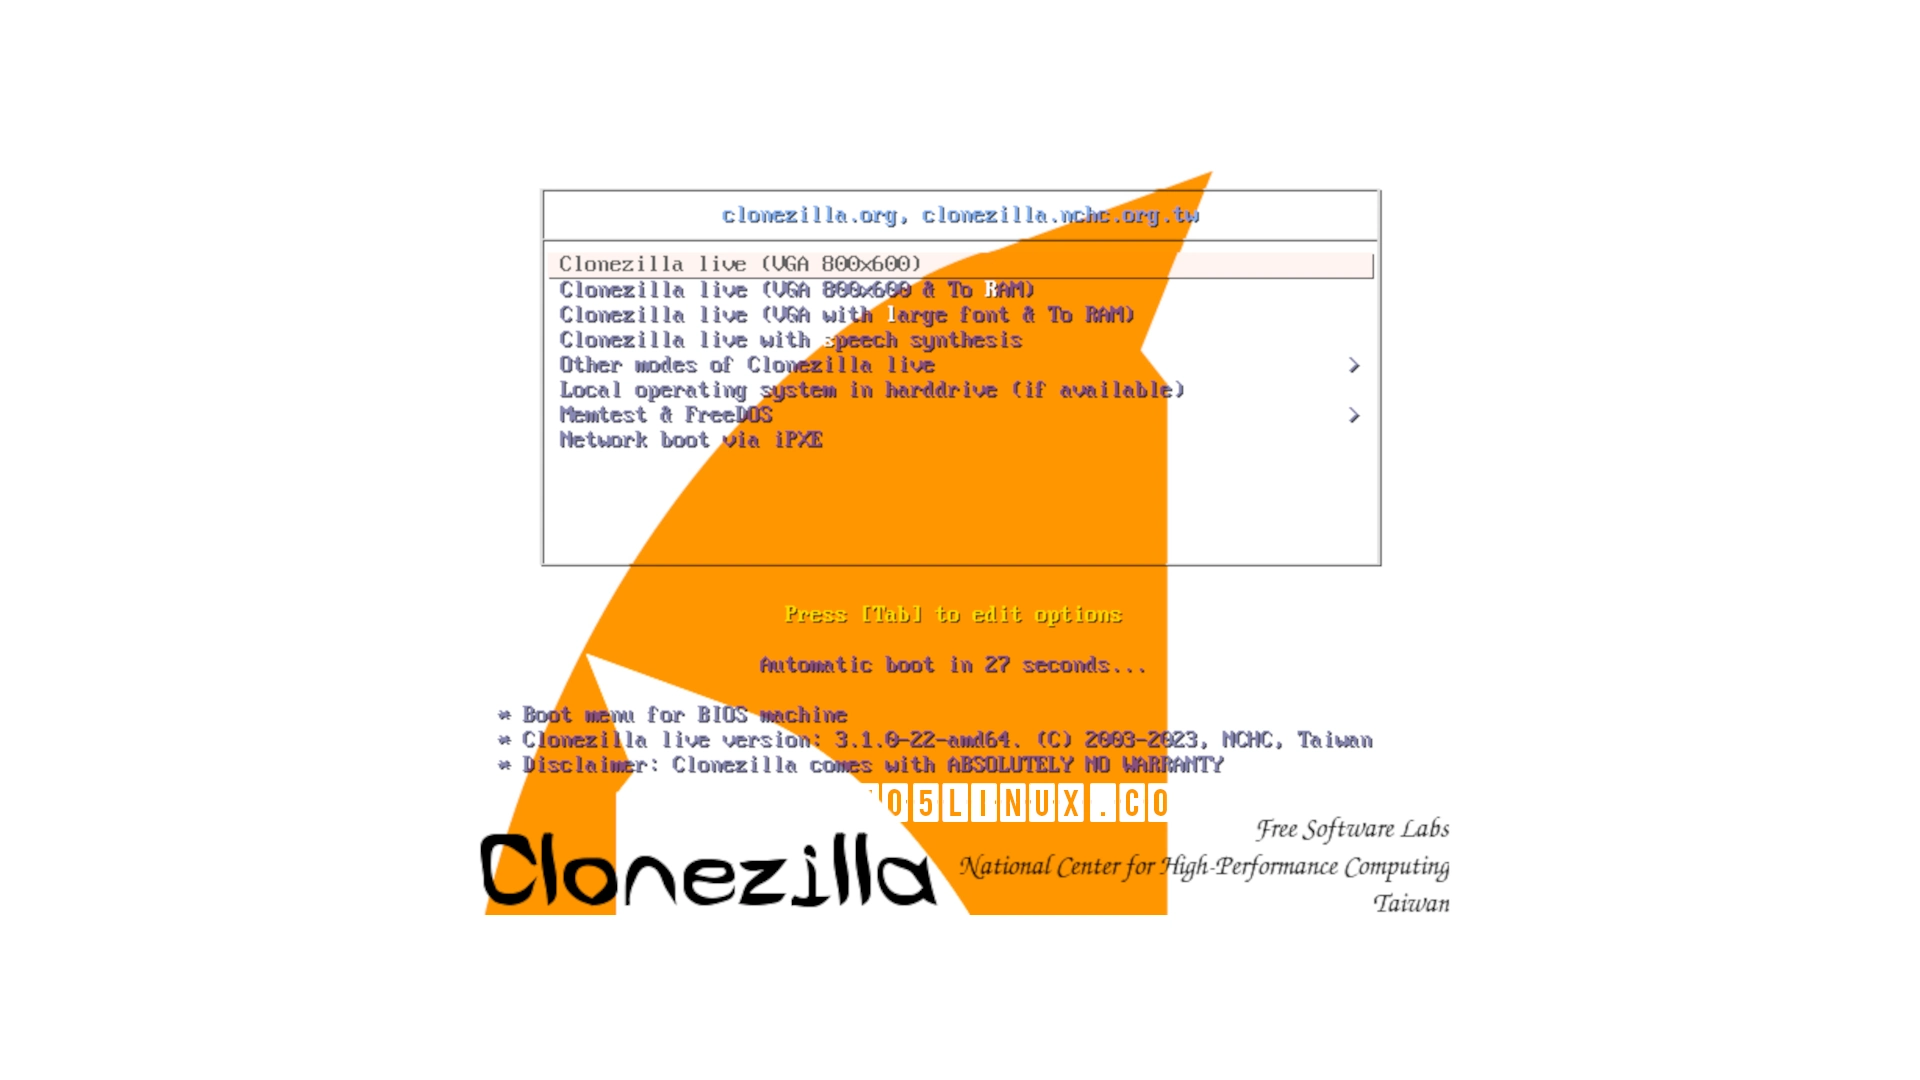 Clonezilla Live 3.1 Released with Memtest86+ 6.10, Improved RAID Support